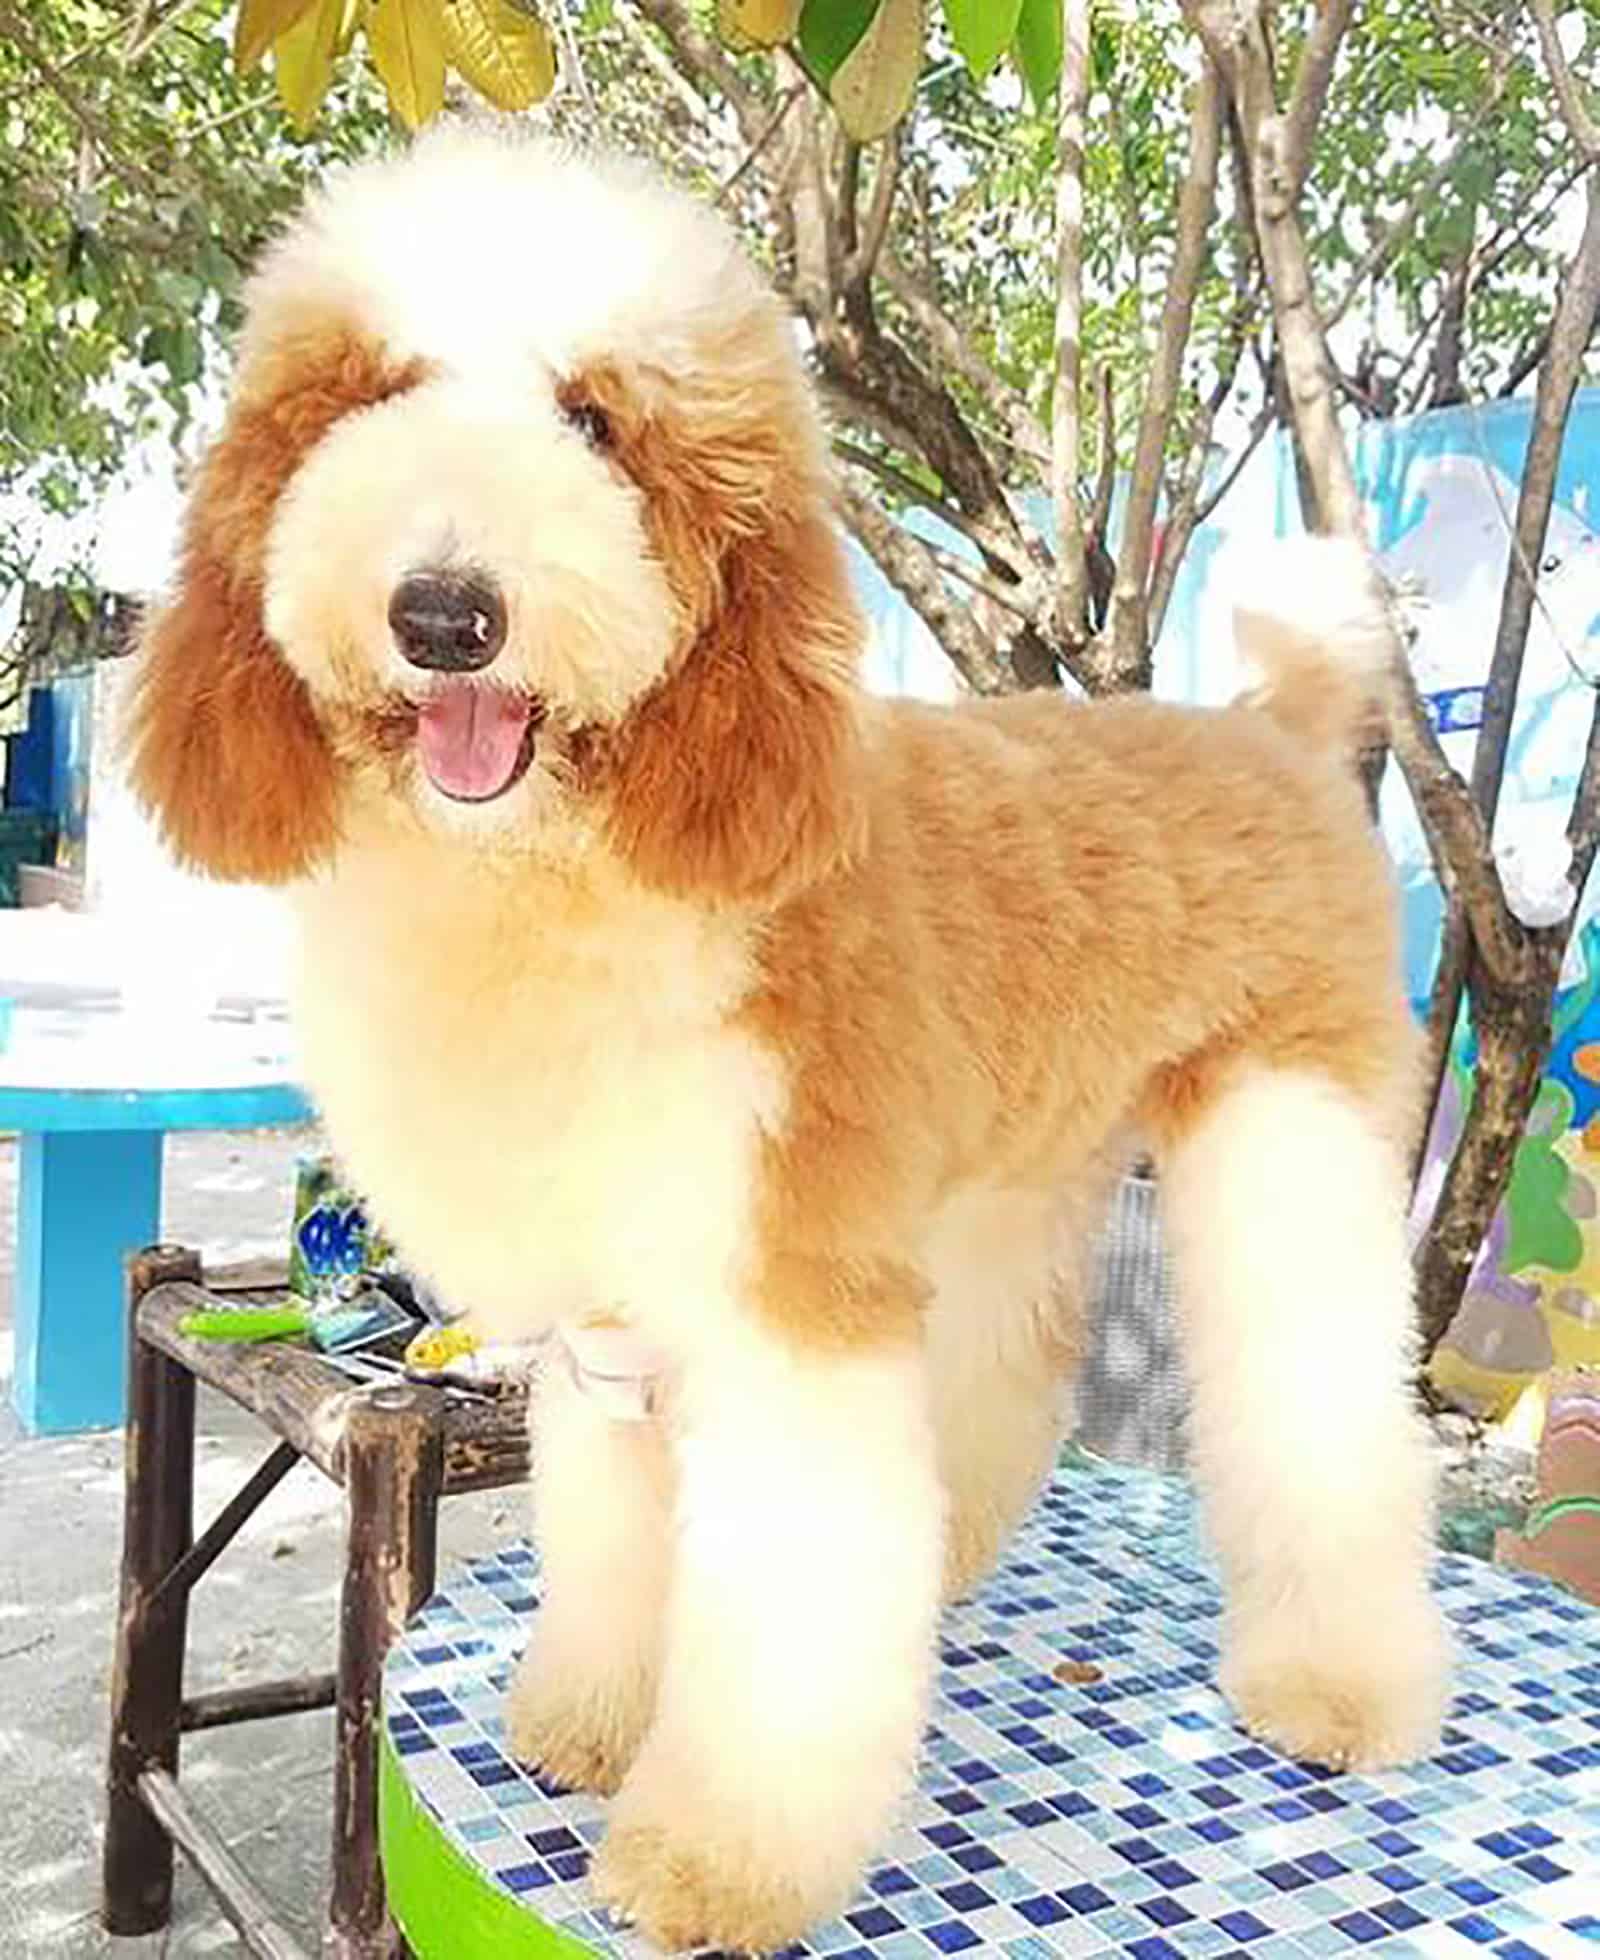 giant poodle standing on a chair outdoors